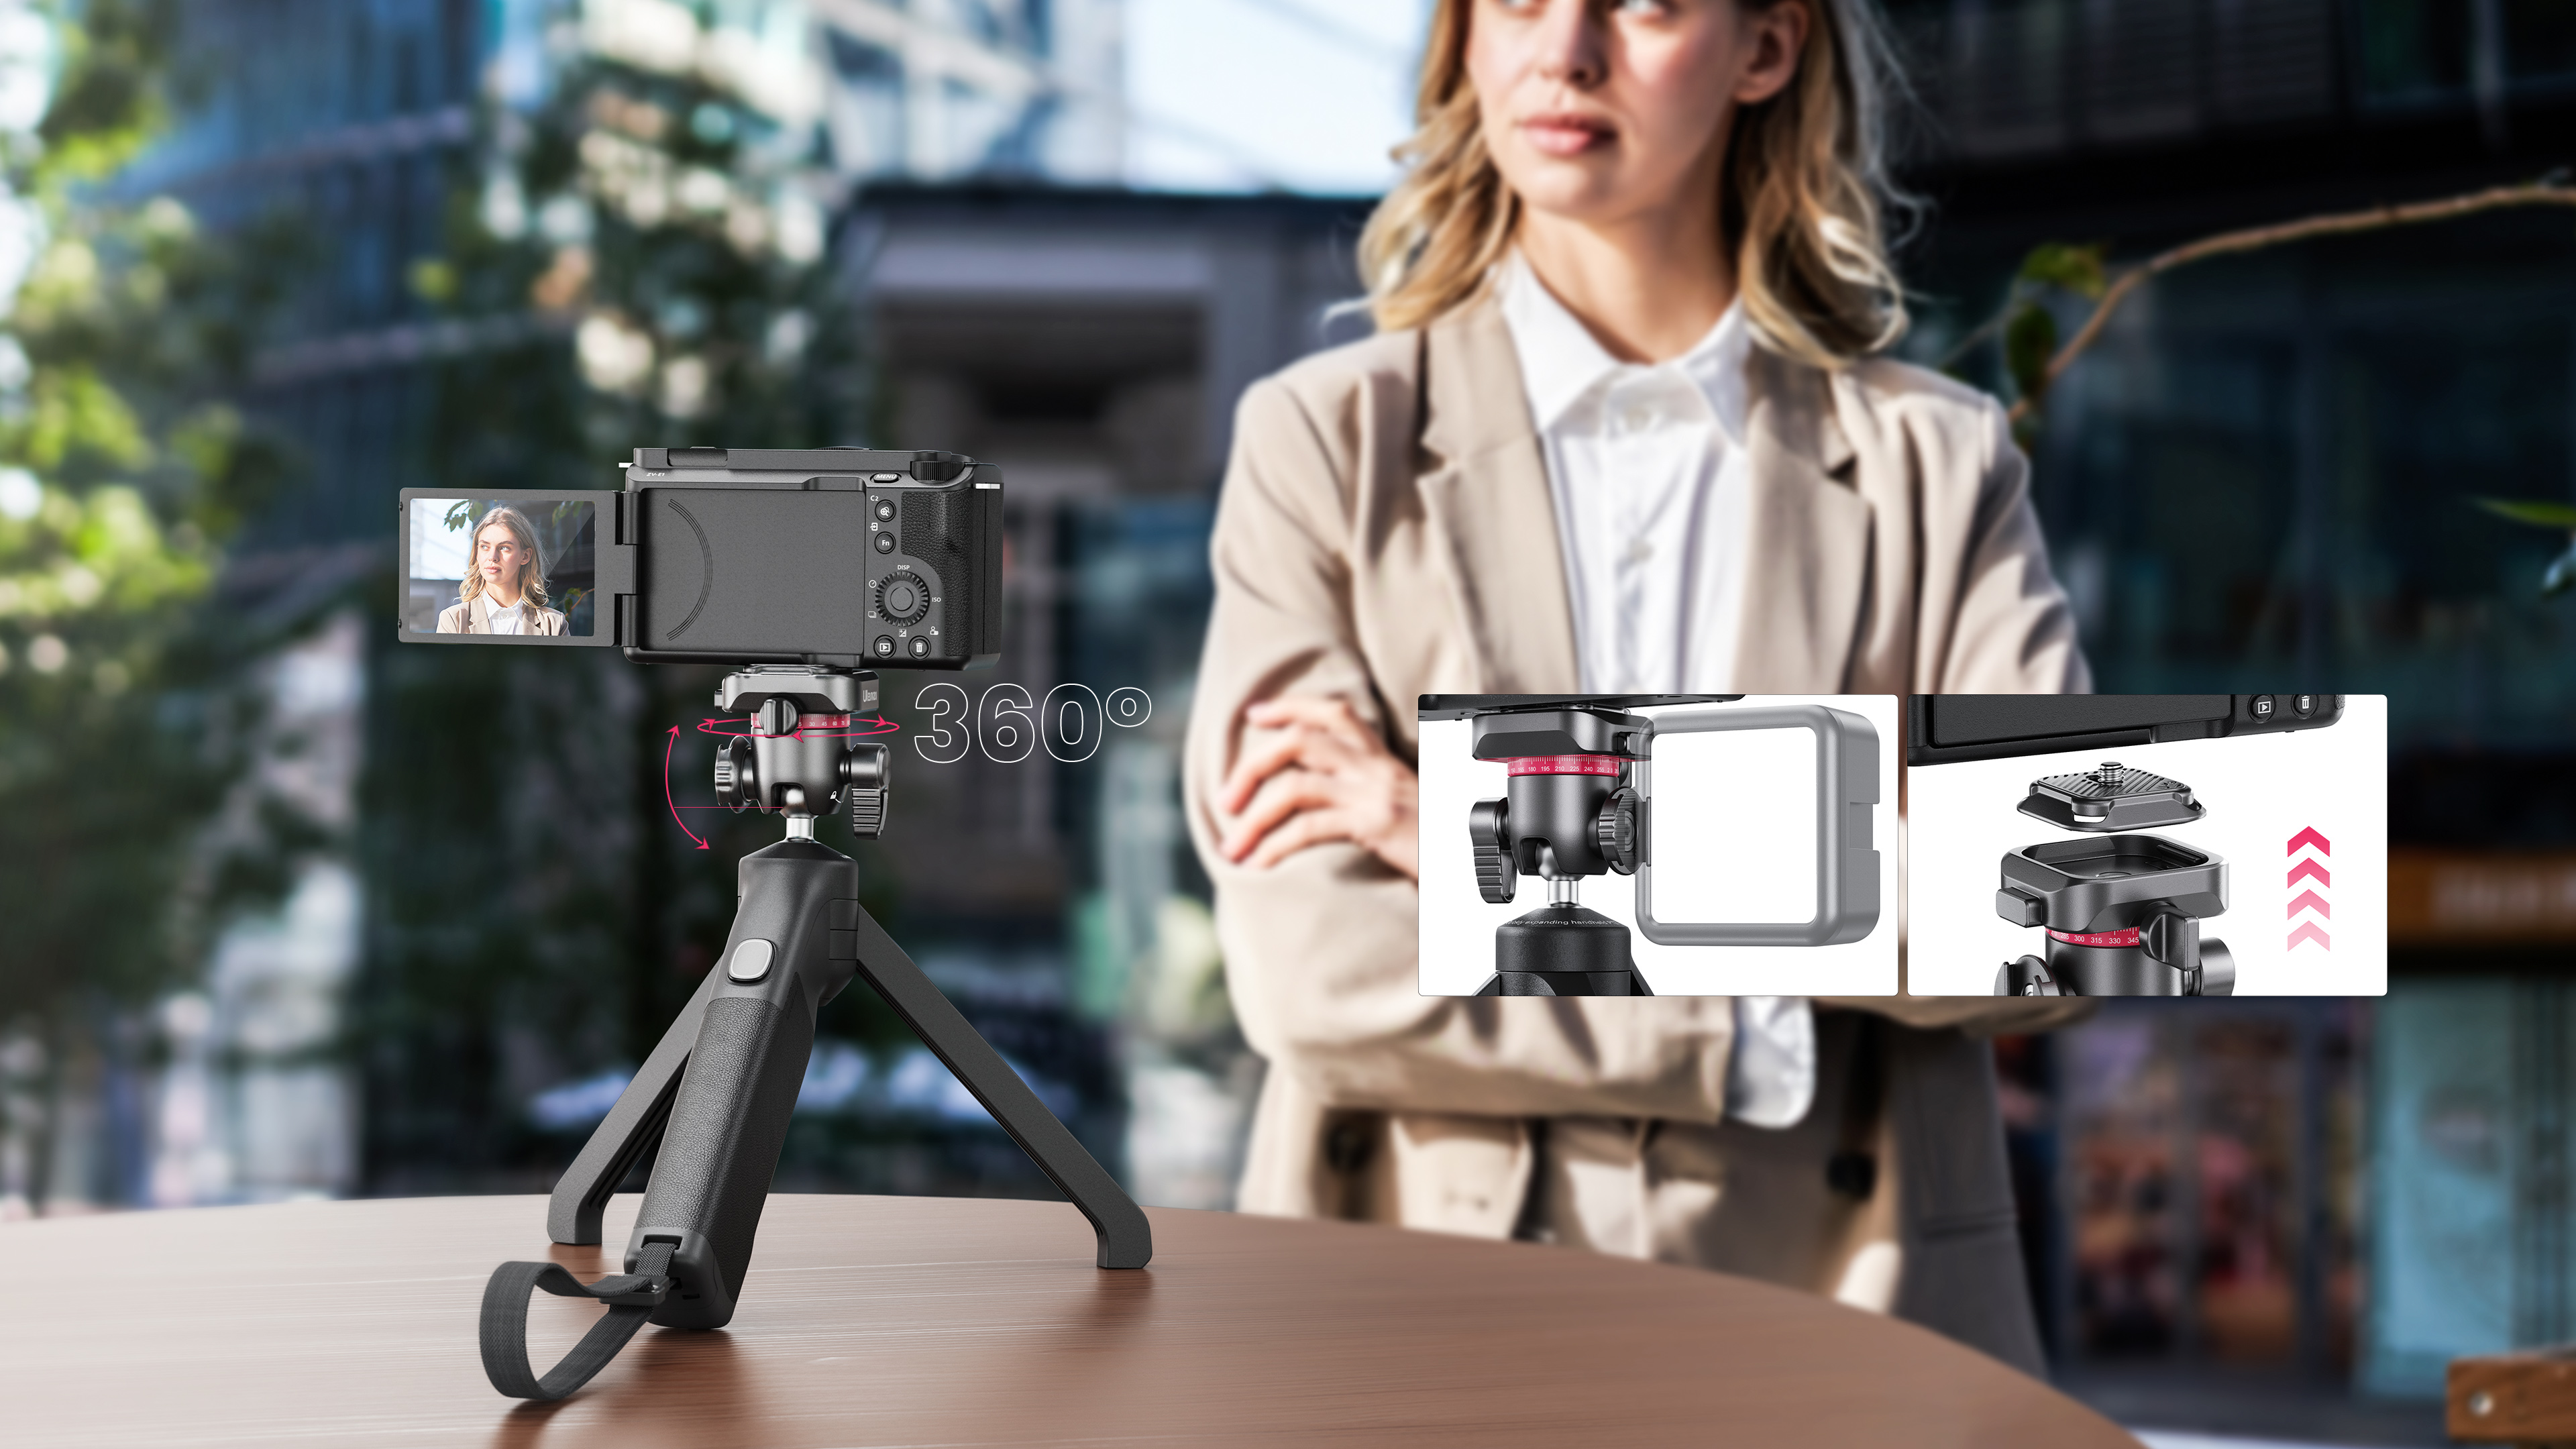 One-click Openning Tripod